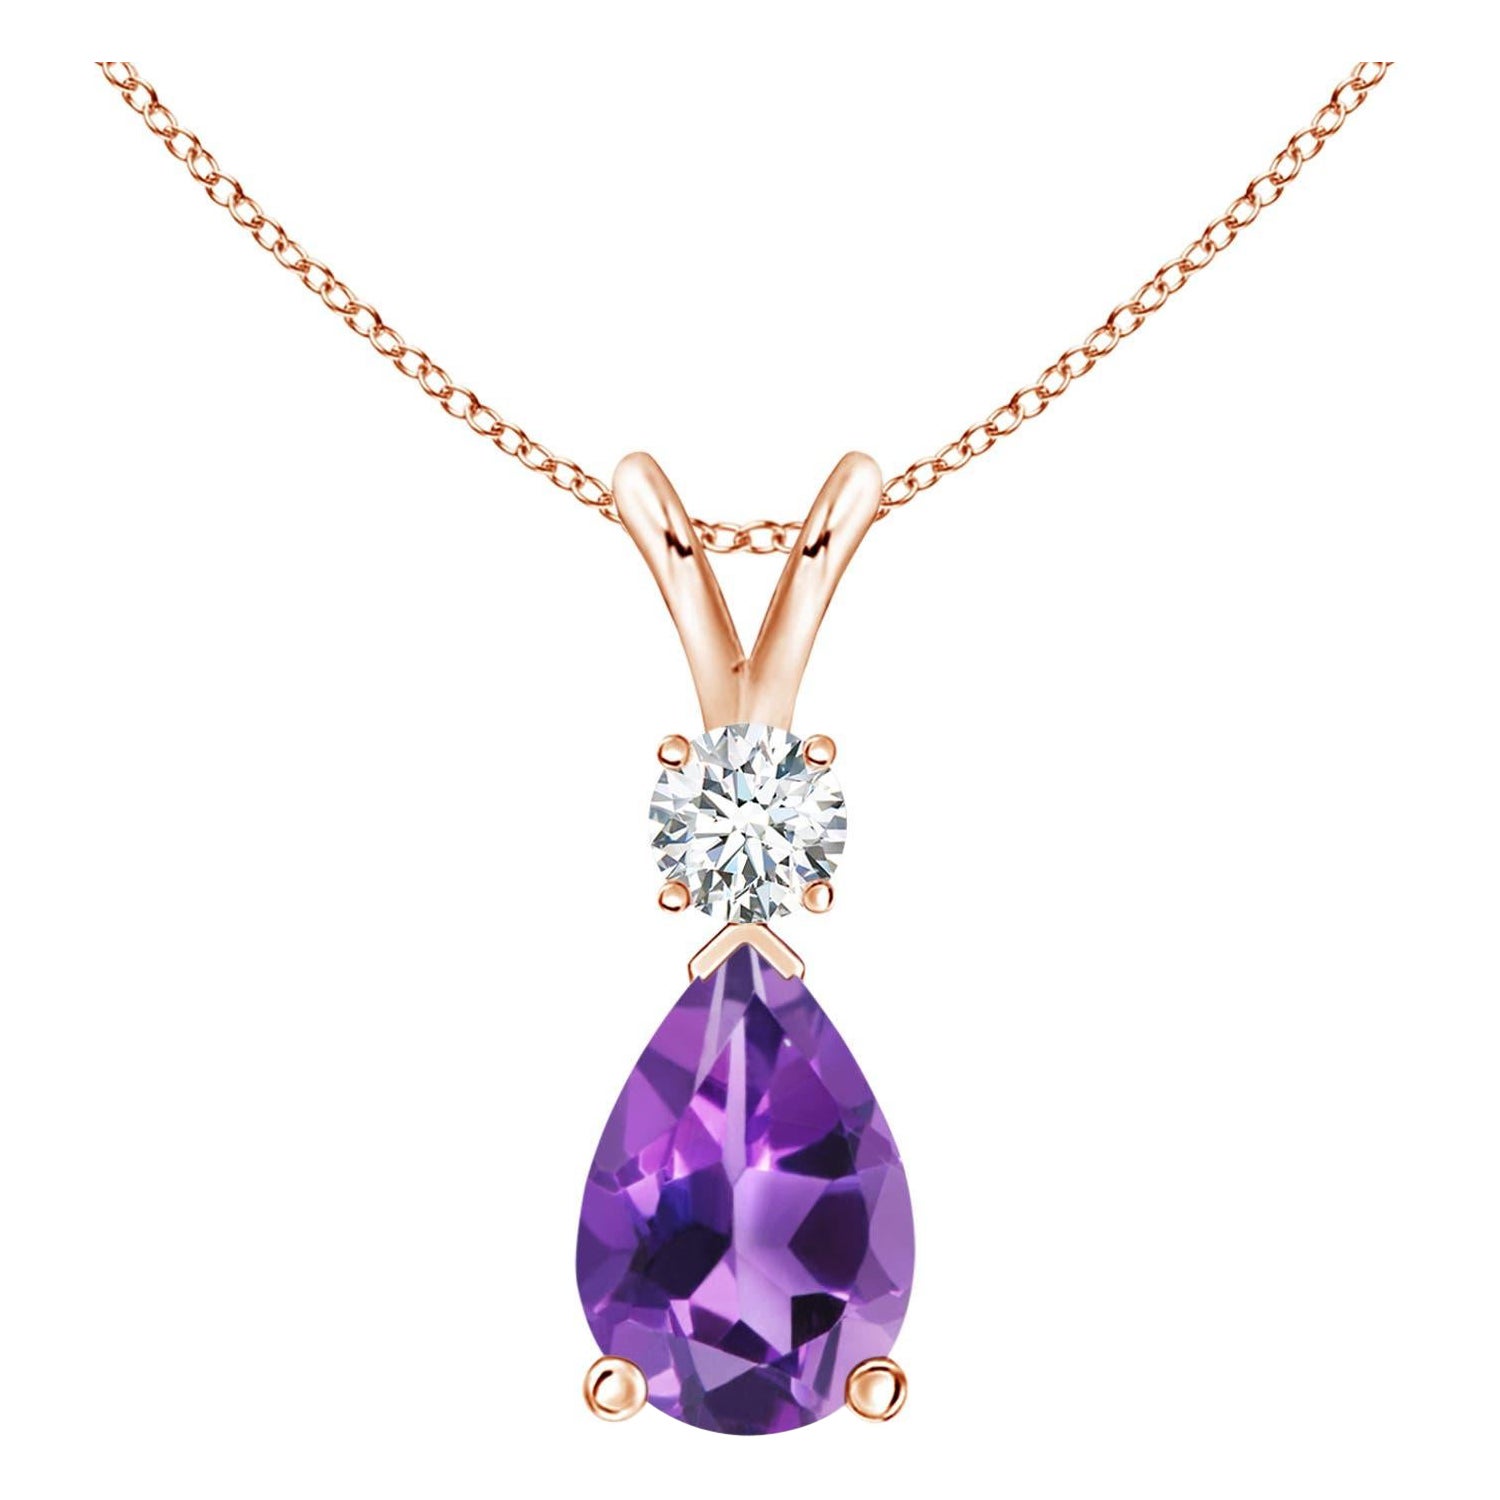 Natural 2.6 ct Amethyst Teardrop Pendant with Diamond in 14K Rose Gold